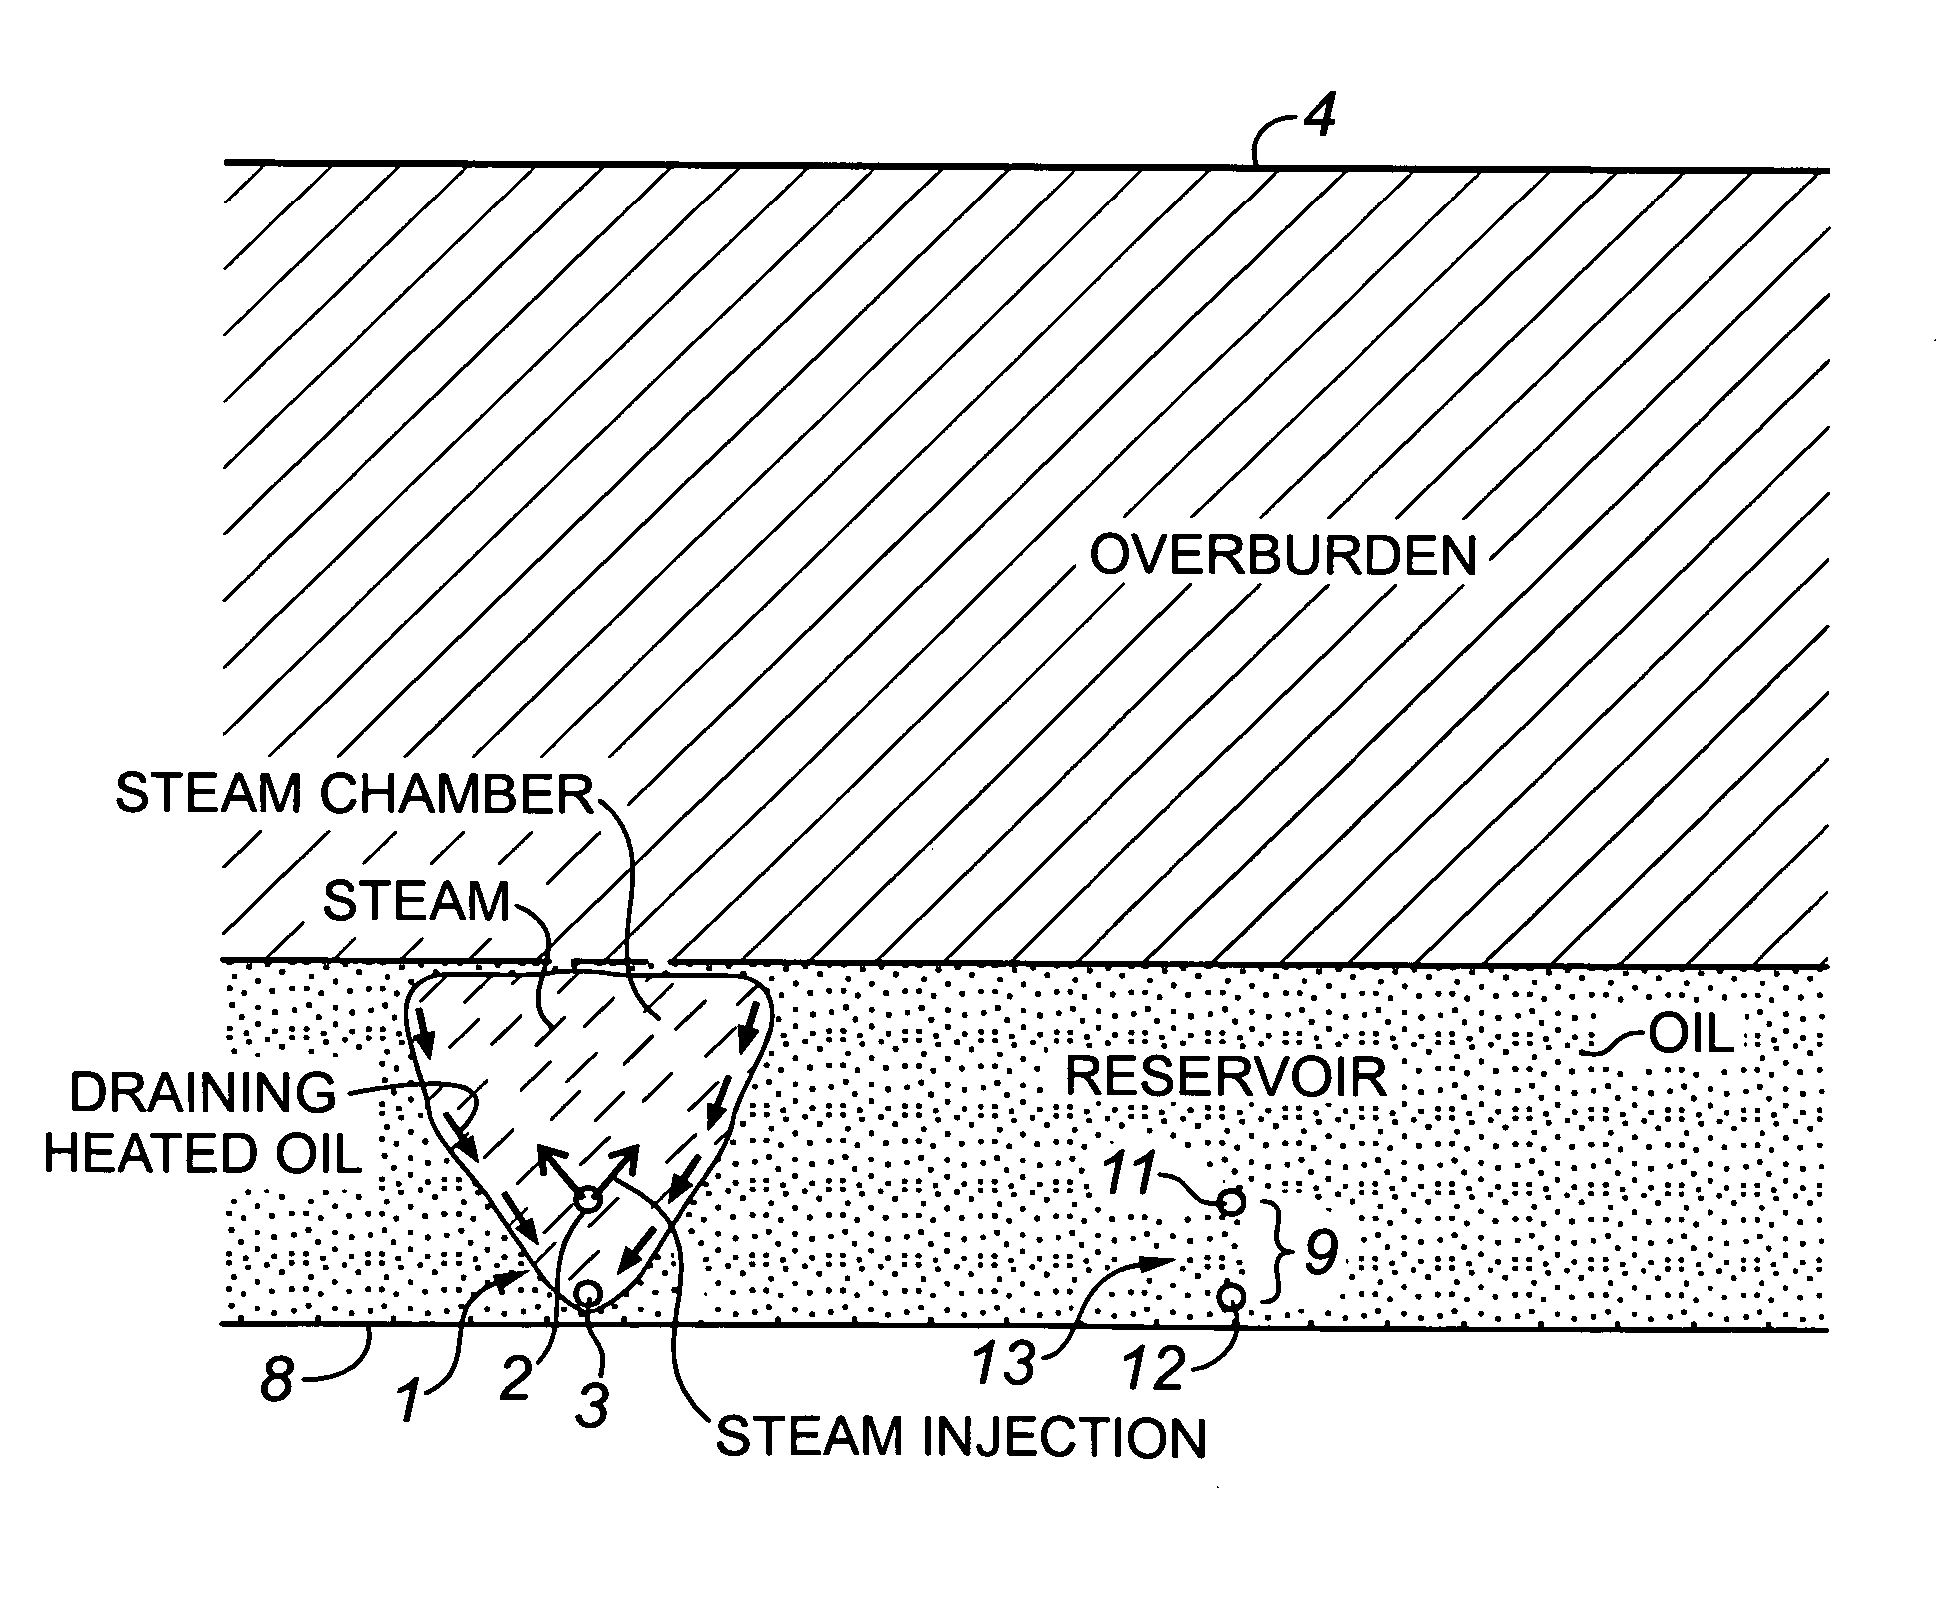 Process for sequentially applying SAGD to adjacent sections of a petroleum reservoir